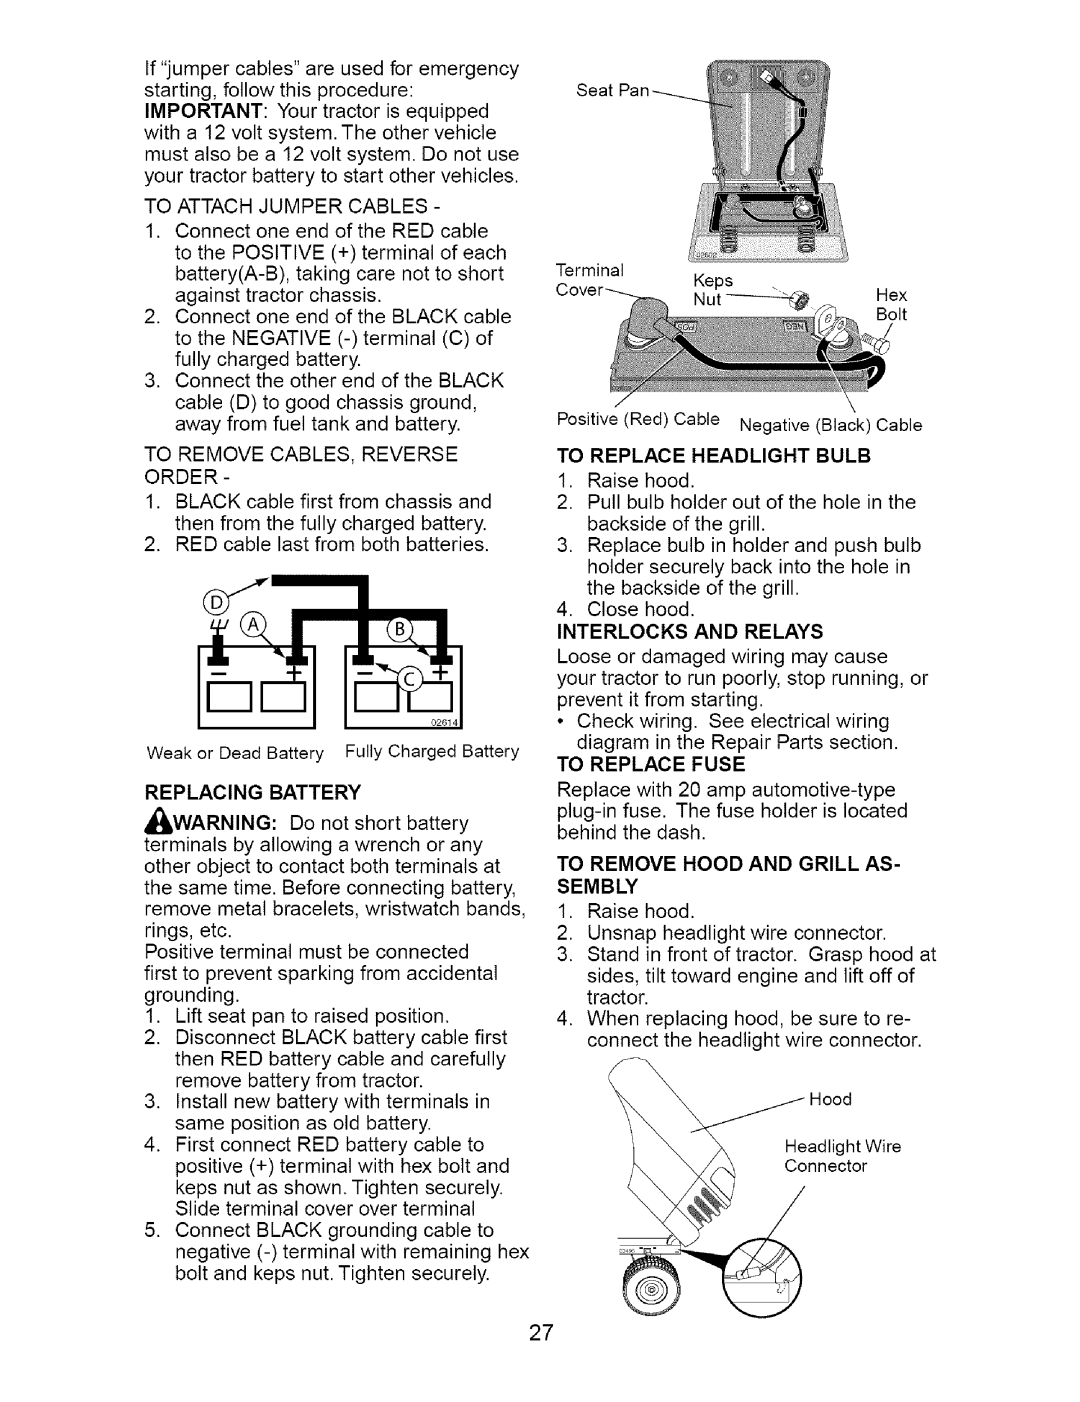 Craftsman 917.274762 owner manual Replacing, Battery, _Warning, Do not short battery, To Replace Headlight Bulb 